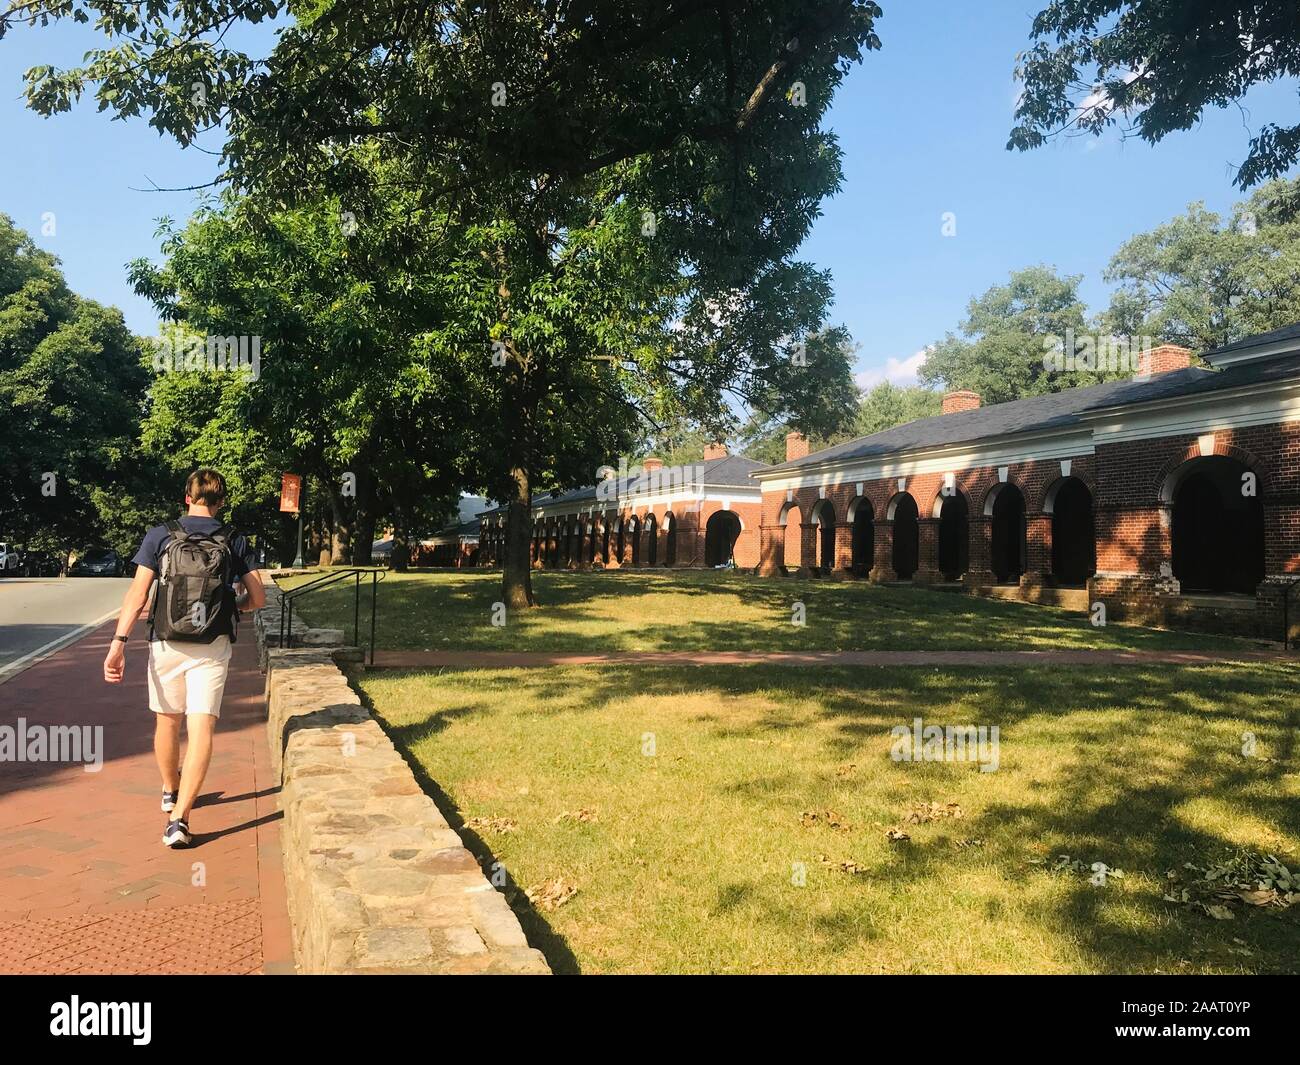 New York, USA. 12th Sep, 2019. A student walks on the campus of the University of Virginia, in Virginia, the United States, on Sept. 12, 2019. For Charles A. Laughlin, chair of the Department of East Asian Languages, Literatures and Cultures at the University of Virginia, it has already been his 'congenial career' to study and translate contemporary and present-age Chinese literature. Credit: Ding Yimin/Xinhua/Alamy Live News Stock Photo